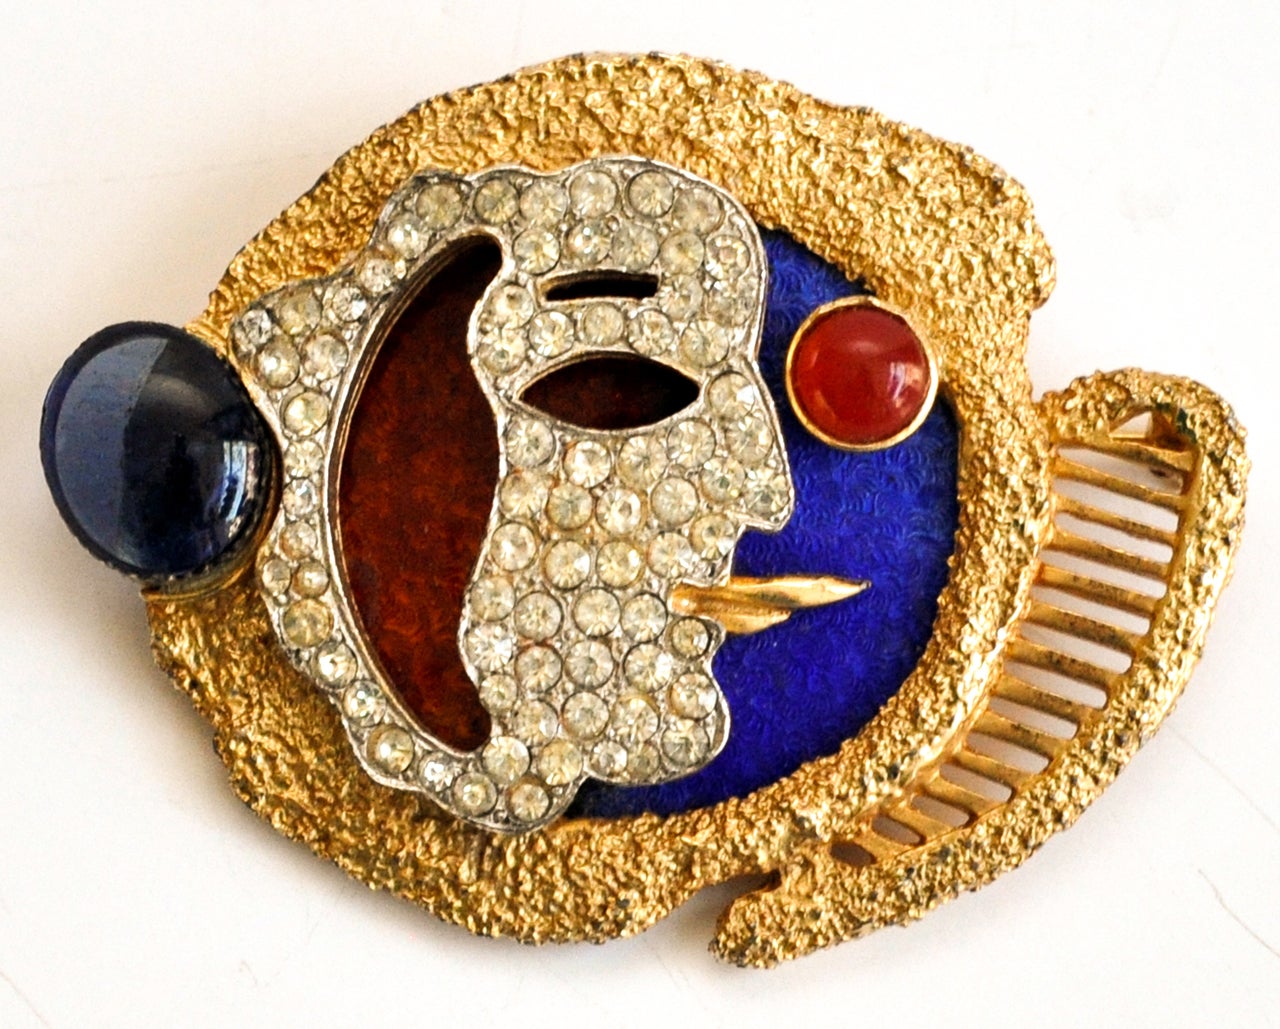 A rare Vendome pin from the sixties designed in the style of George Braque.

Literature:
Costume Jewelry by Harrice Simons Miller (first edition)